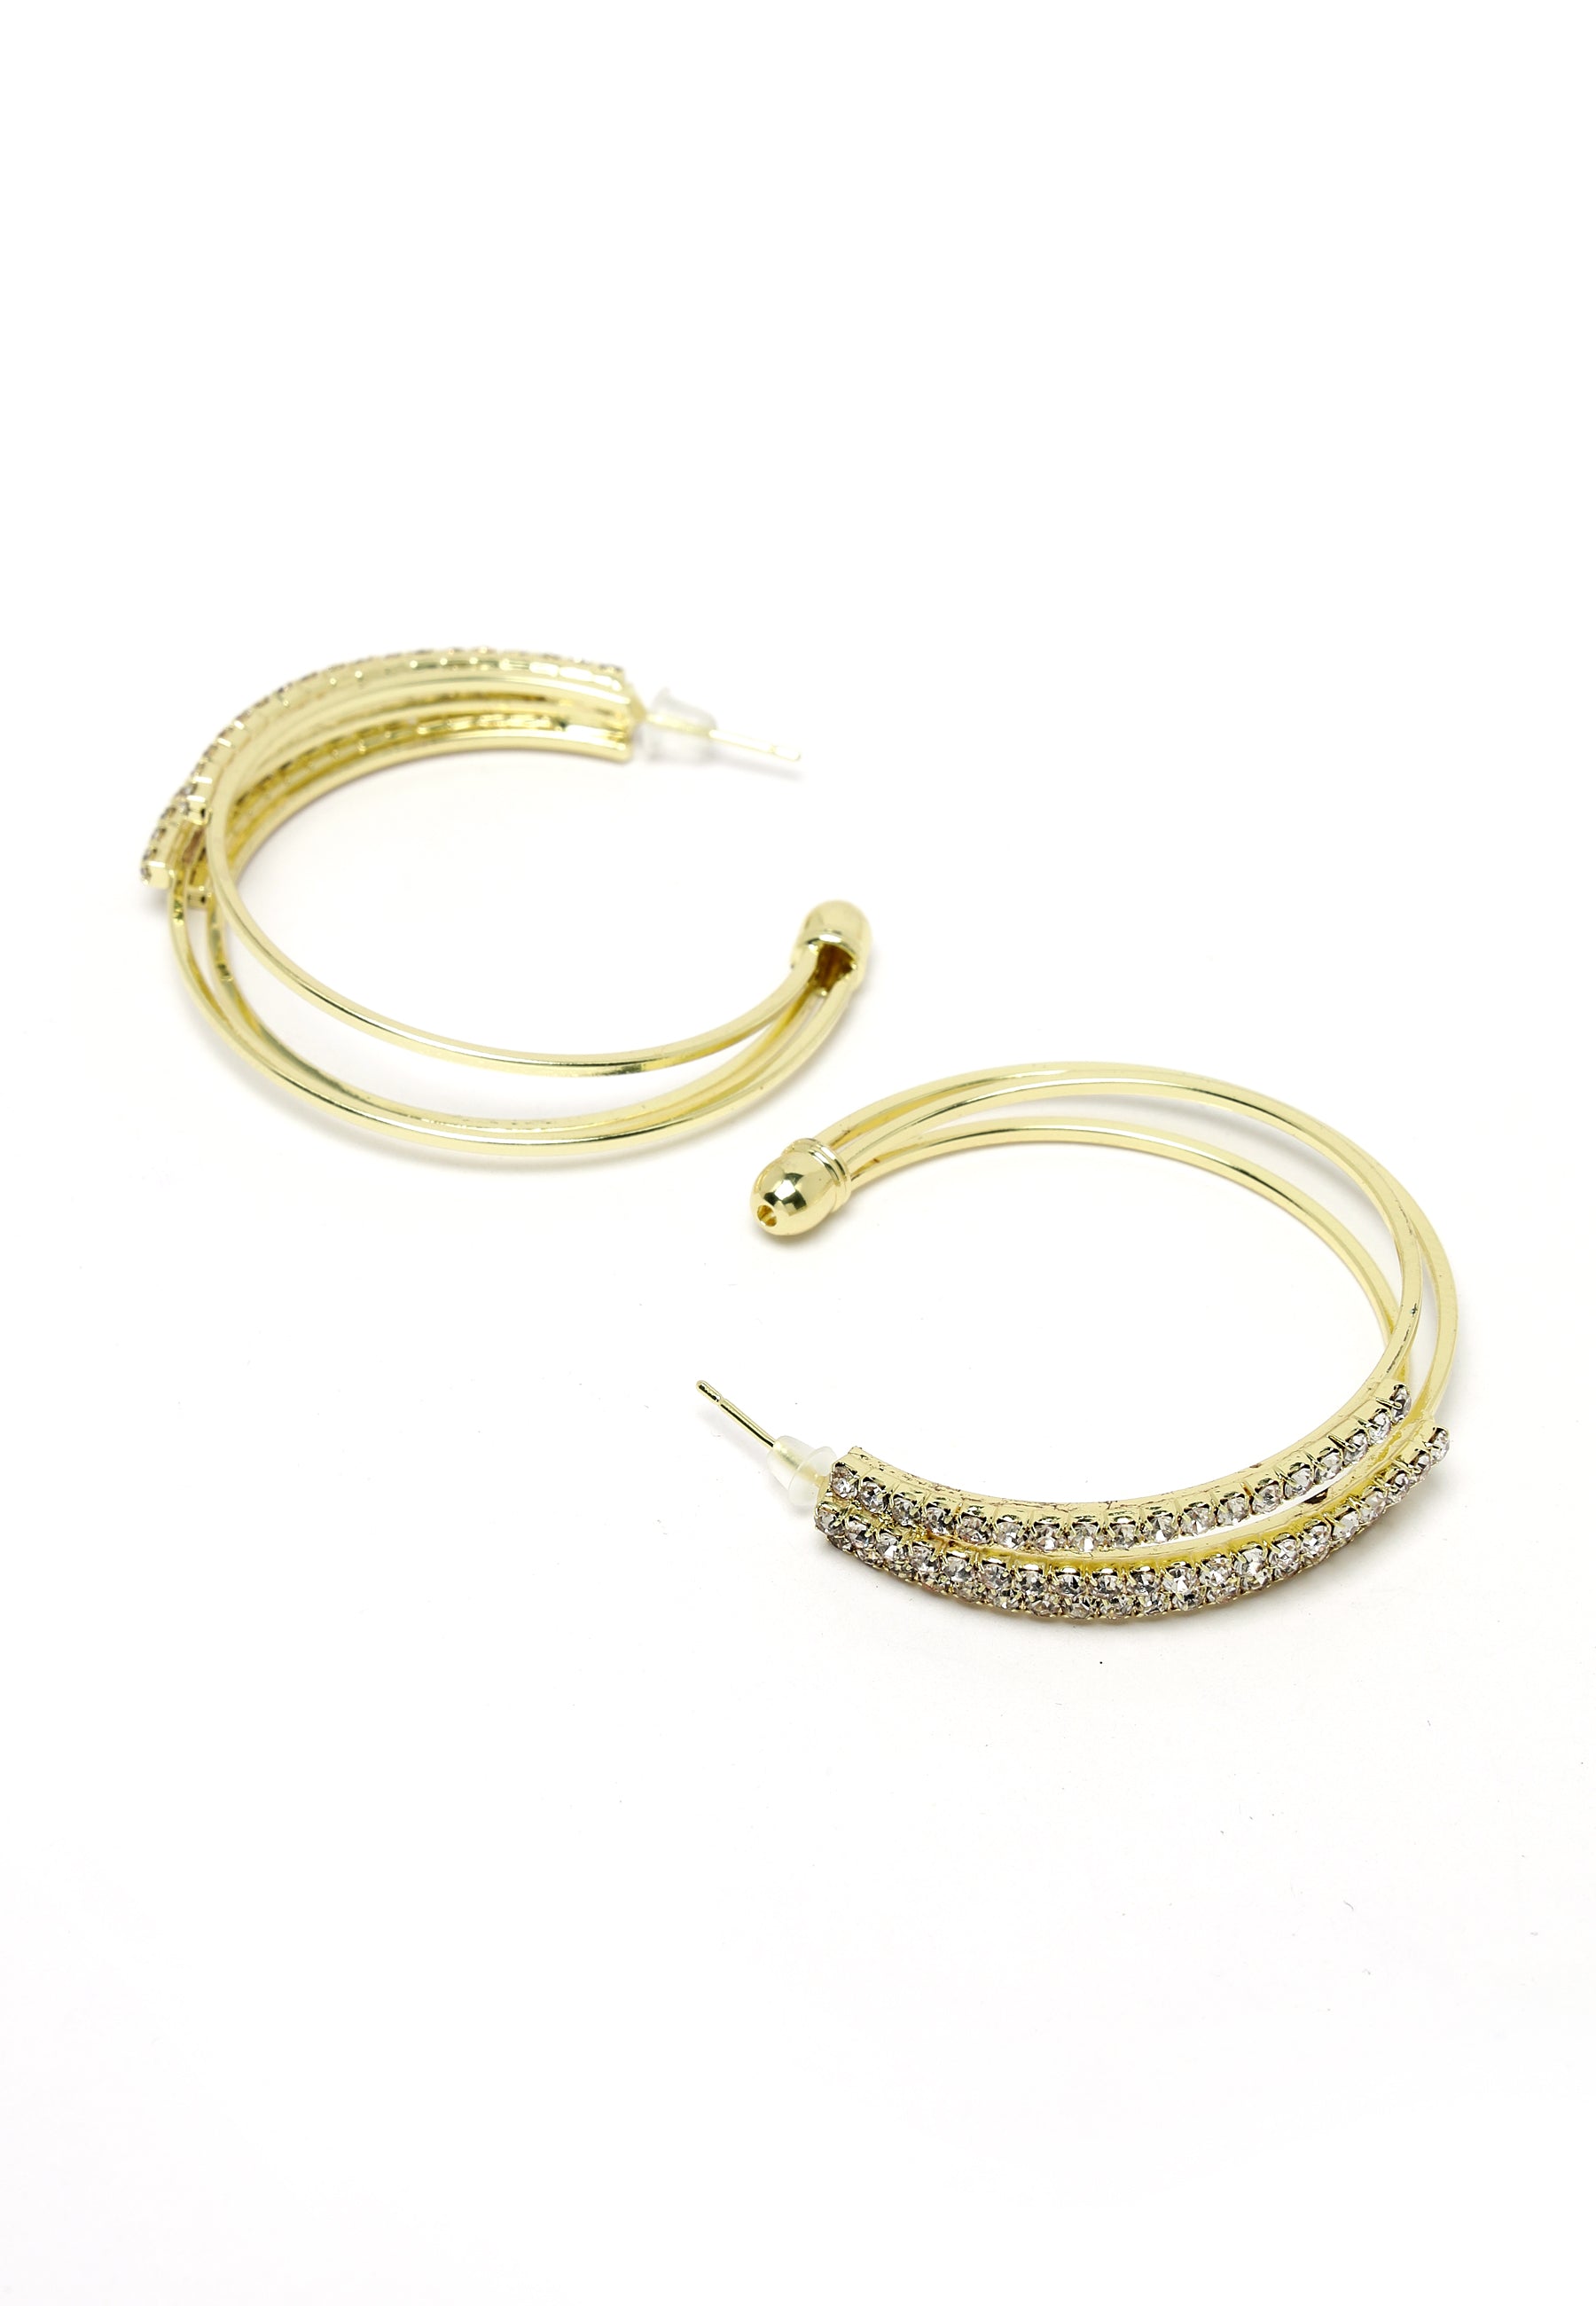 C Shape Gold-Colored Crystal Earrings